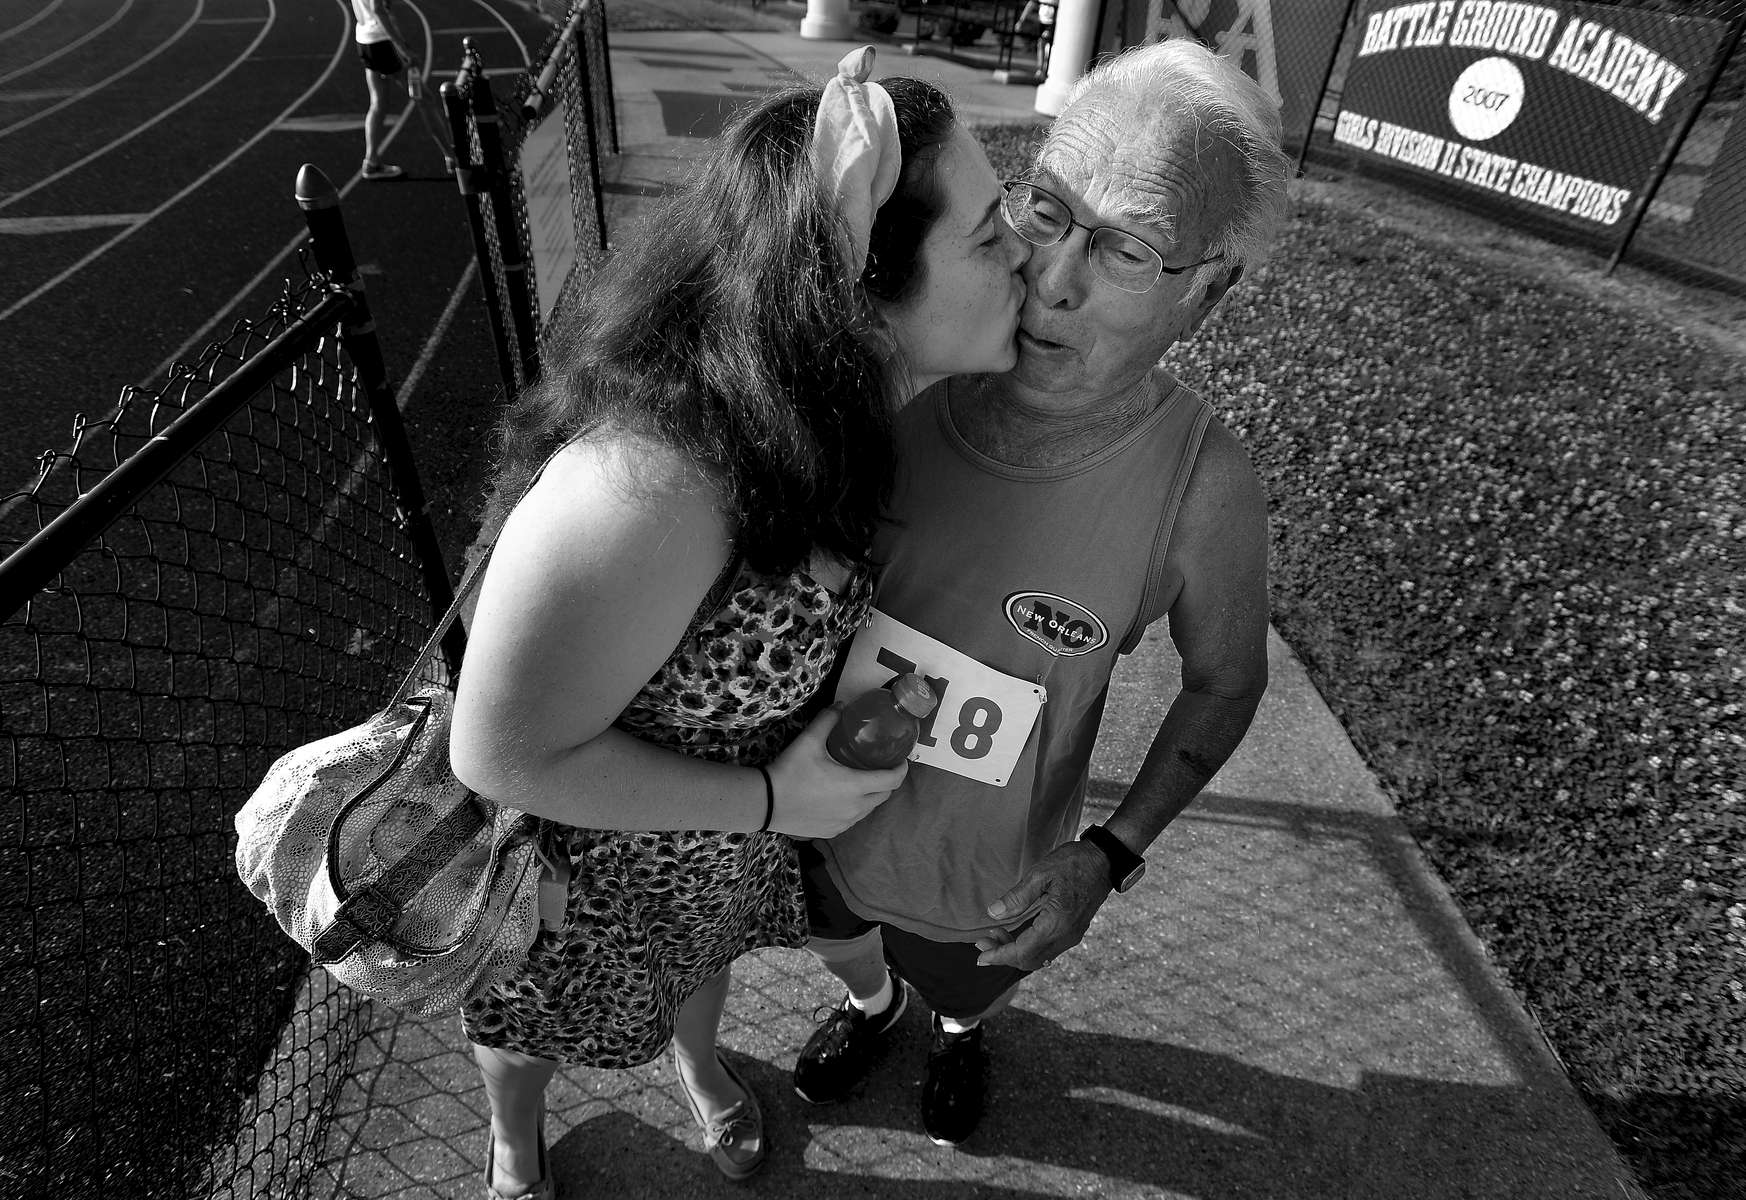 Jewel Trial surprises her great grandfather, Charles Trial, 78, with a kiss before he competed in the men's 400m and 1500m events during the Tennessee Senior Olympics State Finals in Franklin, Tenn. (Mark Zaleski/ The Tennessean)